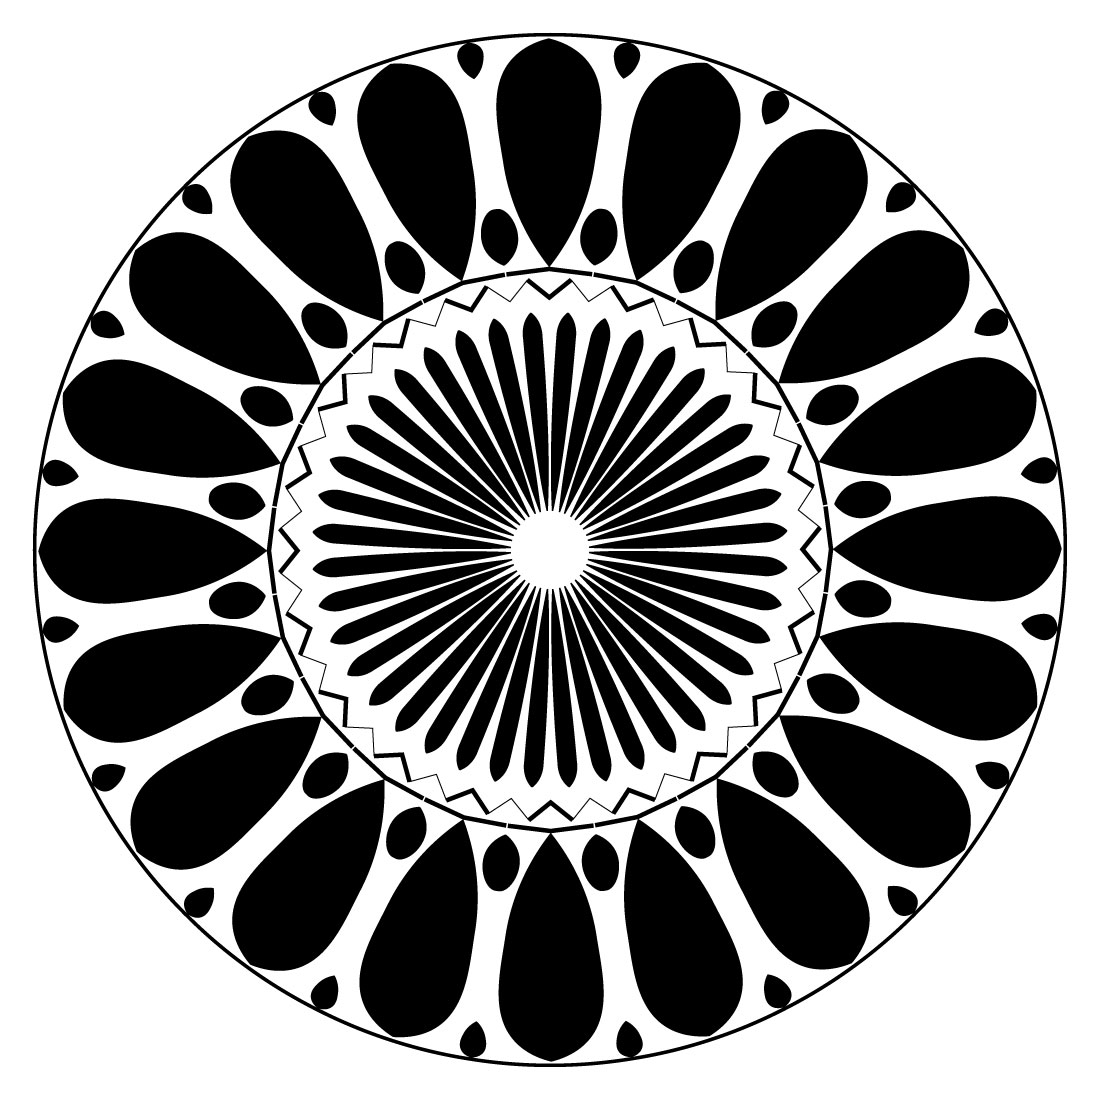 Mandala Art with black and white with middle light cover image.